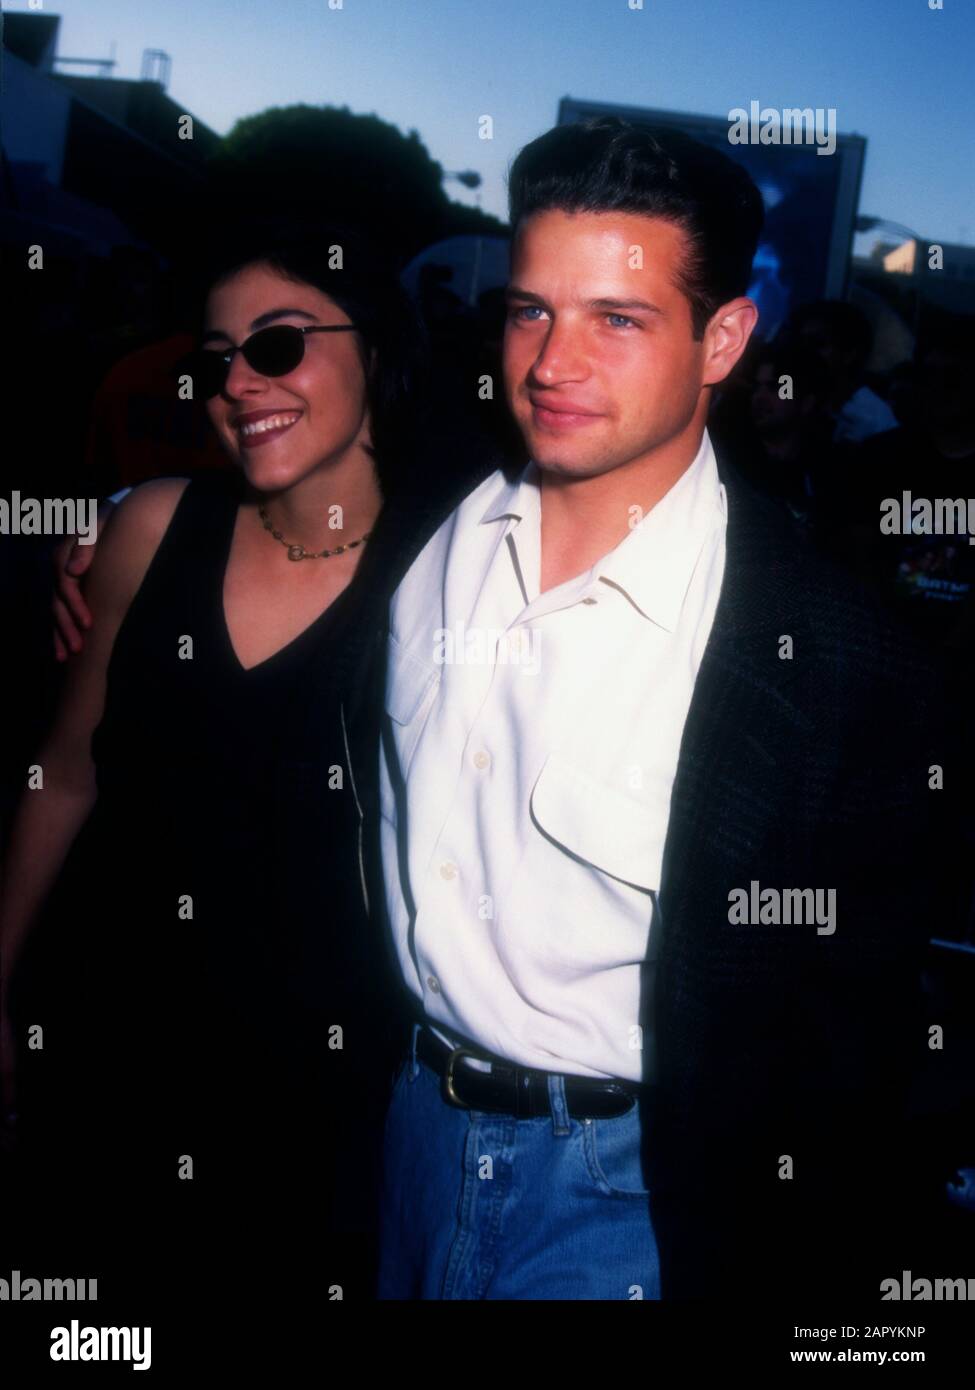 Westwood, California, USA 9th June 1995 Actor Justin Walker attends Warner  Bros. Pictures' 'Batman Forever' Premiere on June 9, 1995 at Mann Village  Theatre in Westwood, California, USA. Photo by Barry King/Alamy